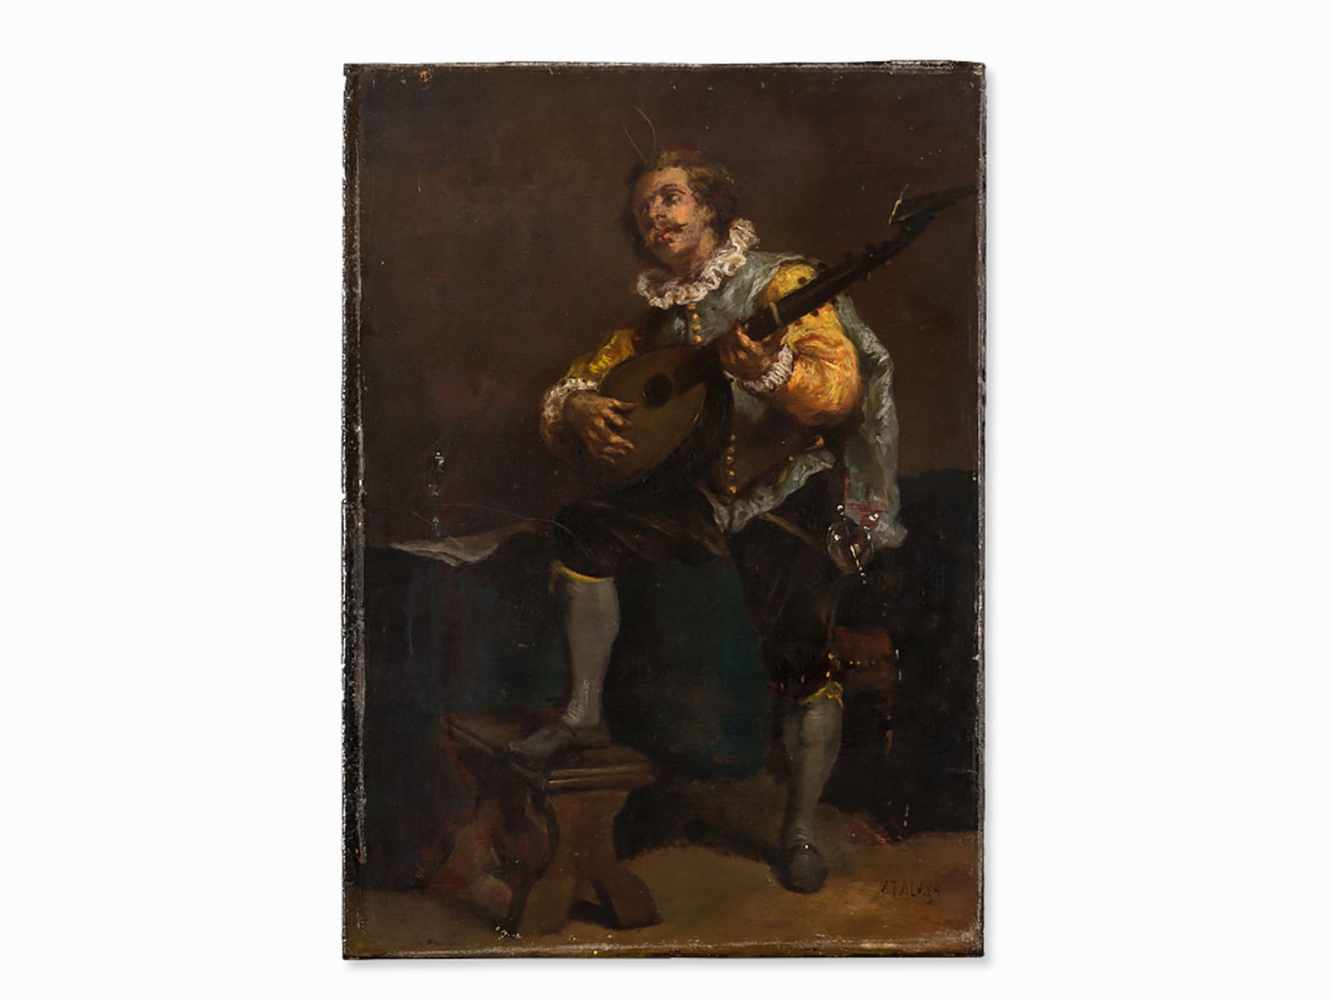 Enrique Atalaya (1851-1914), Man Playing The Lute, Oil, c. 1880 - Image 2 of 8